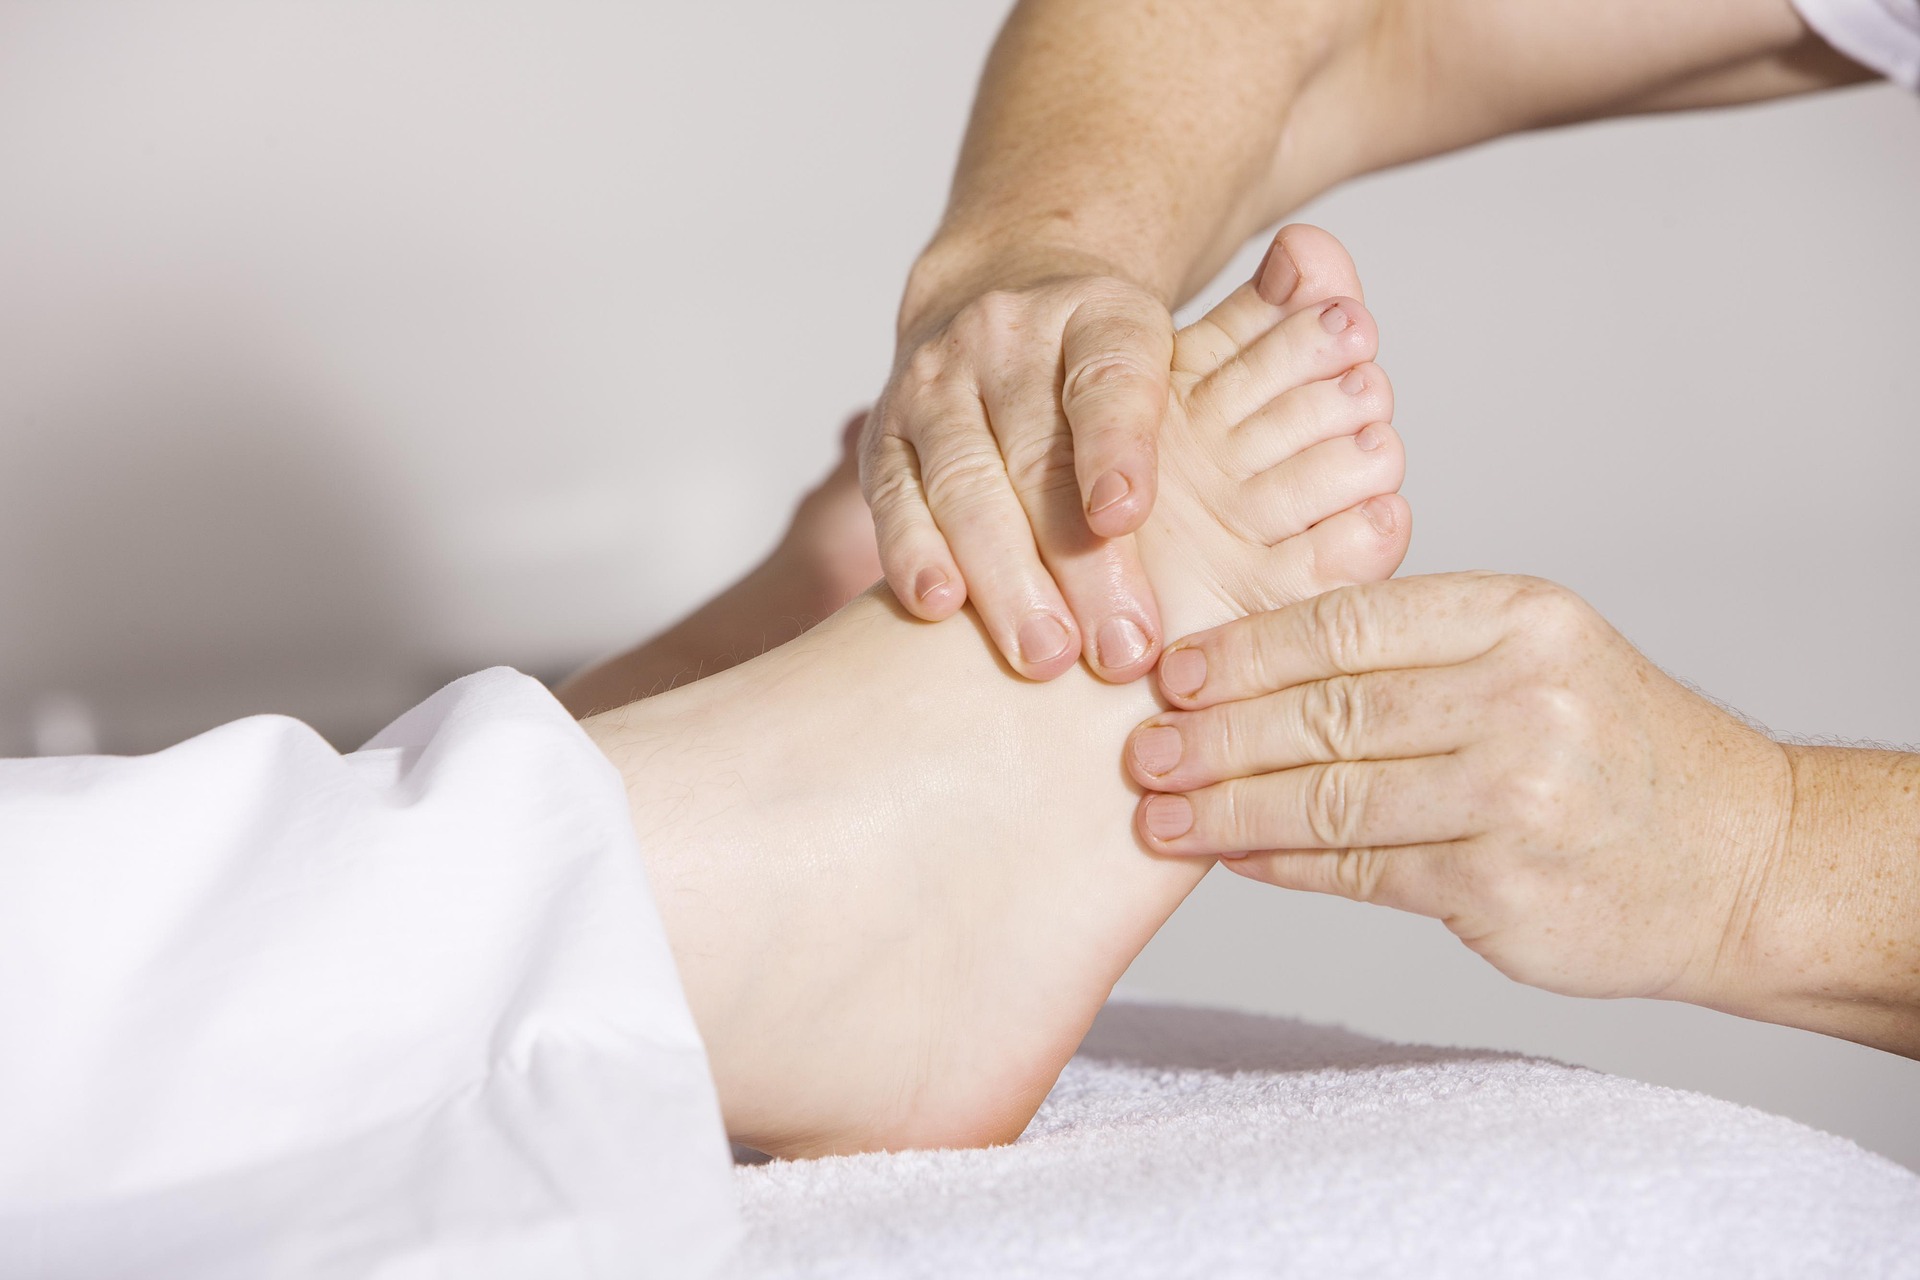 massage therapist performing foot massage to treat heel pain caused by plantar fasciitis